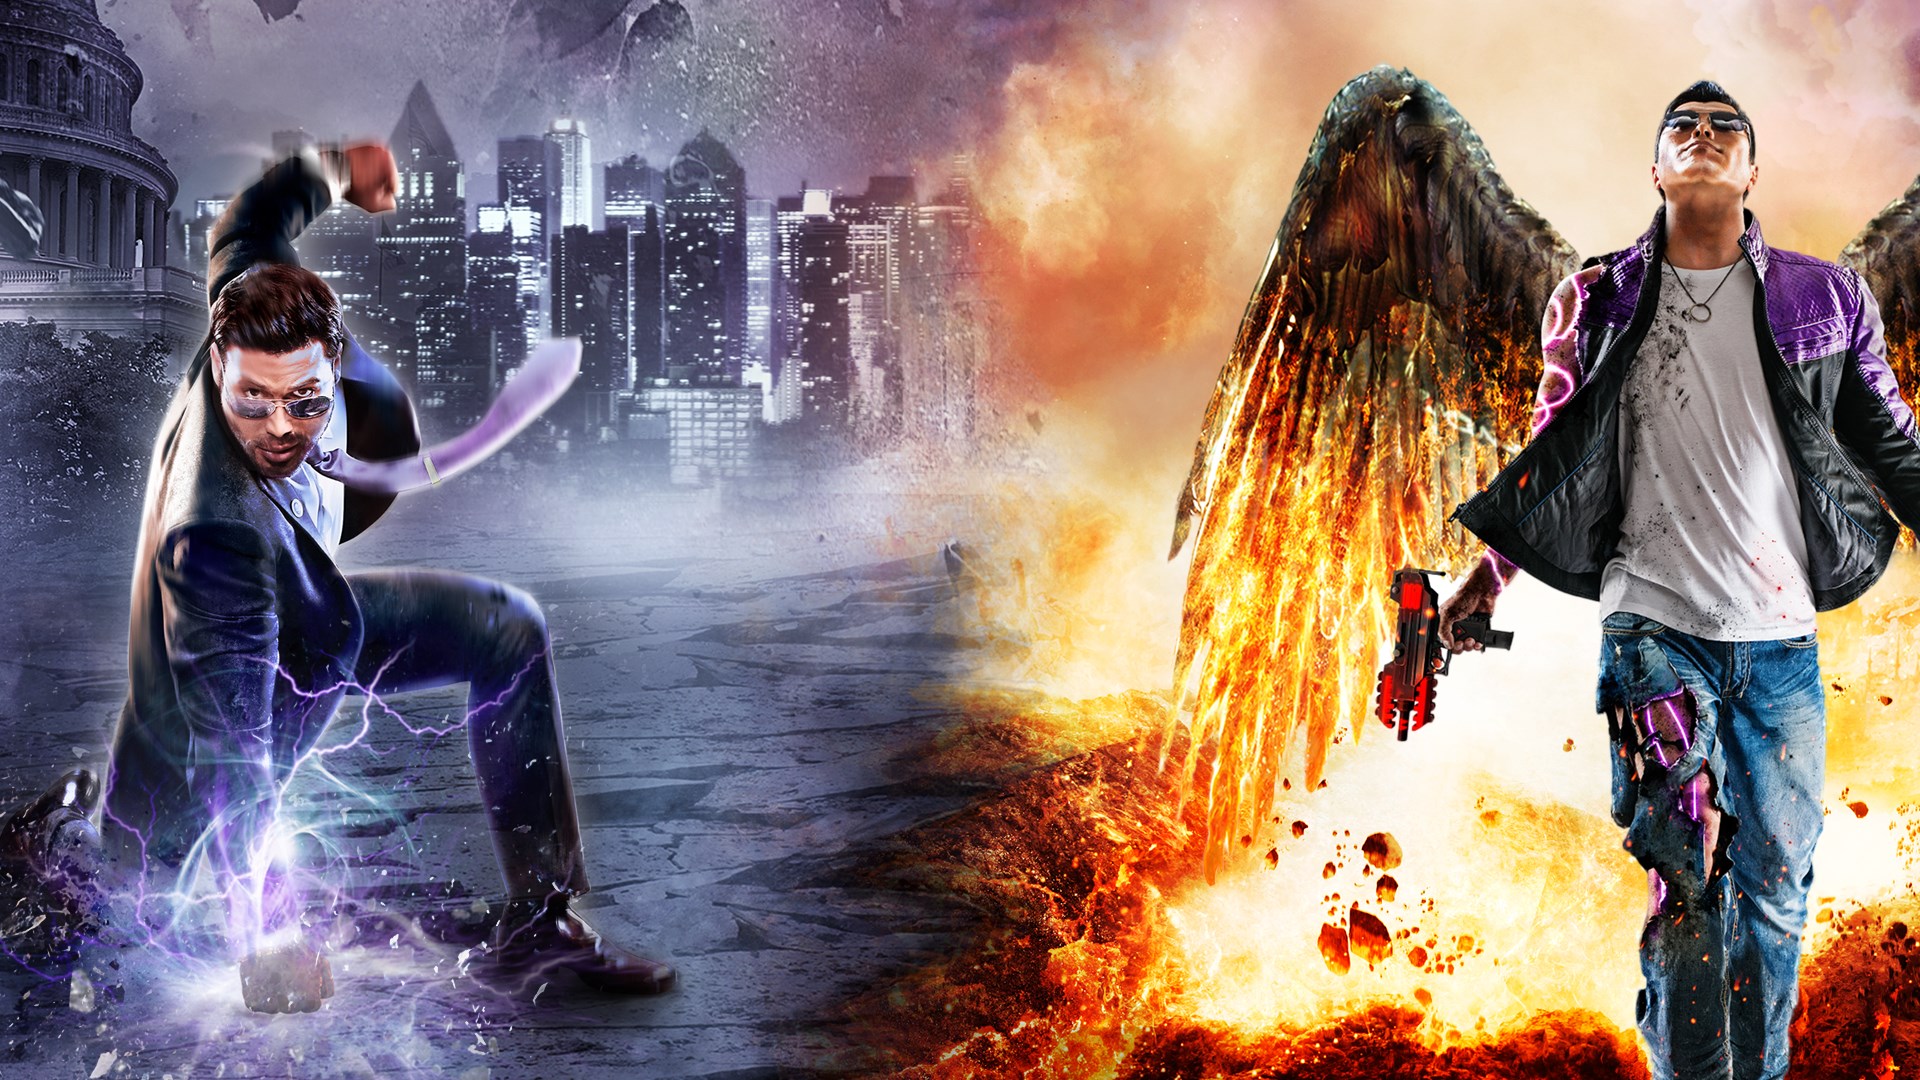 Saints Row IV: Re-Elected And Gat Out Of Hell review, Games